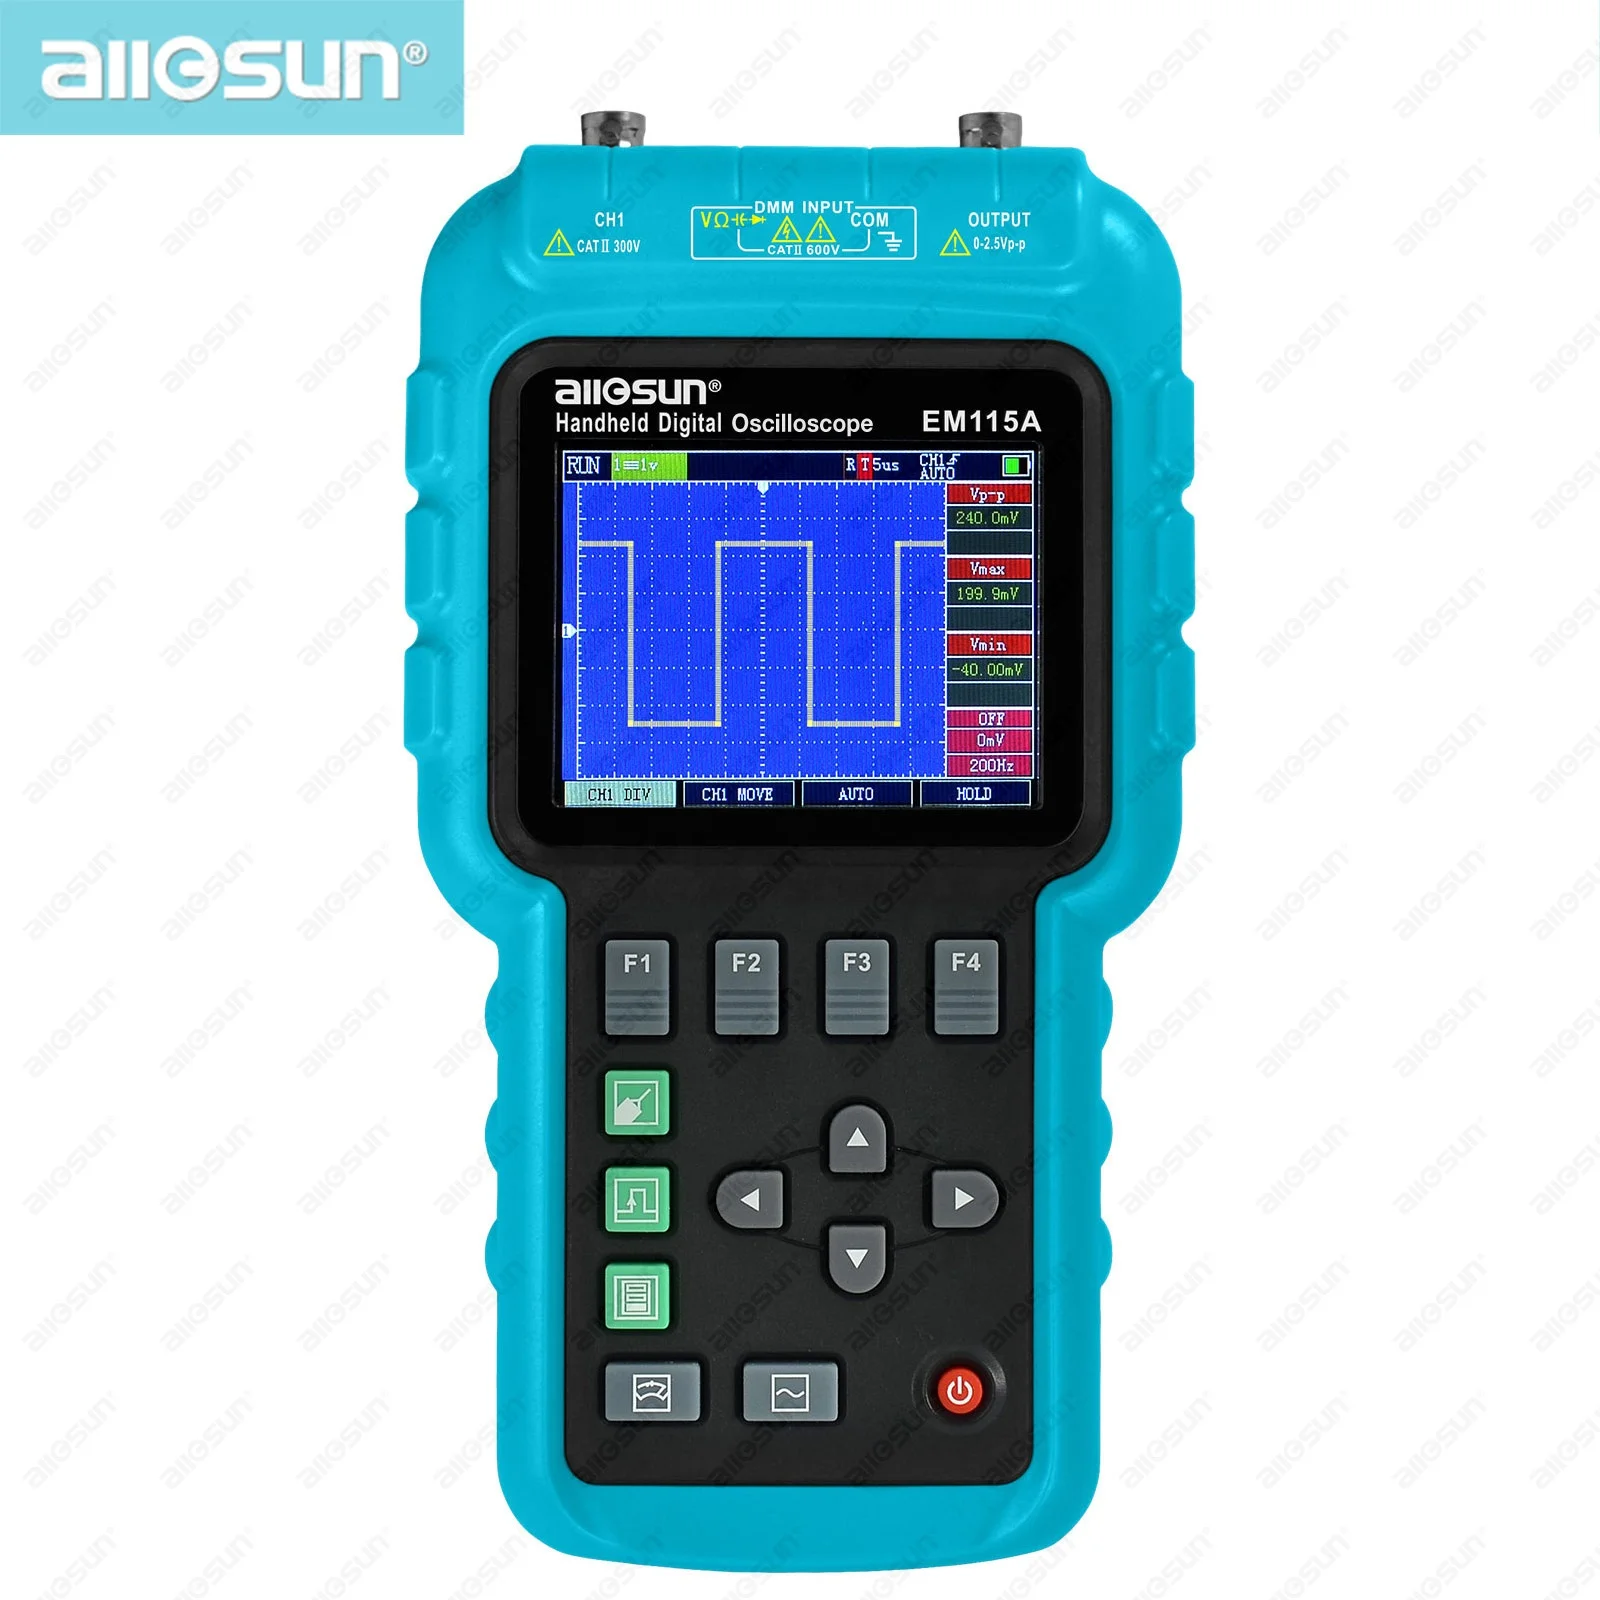 

all-sun EM115A Handheld Oscillograph 3 in 1 Multi-function Oscilloscope 50MHZ Color Screen Scope meter Single Channel Hot Sale